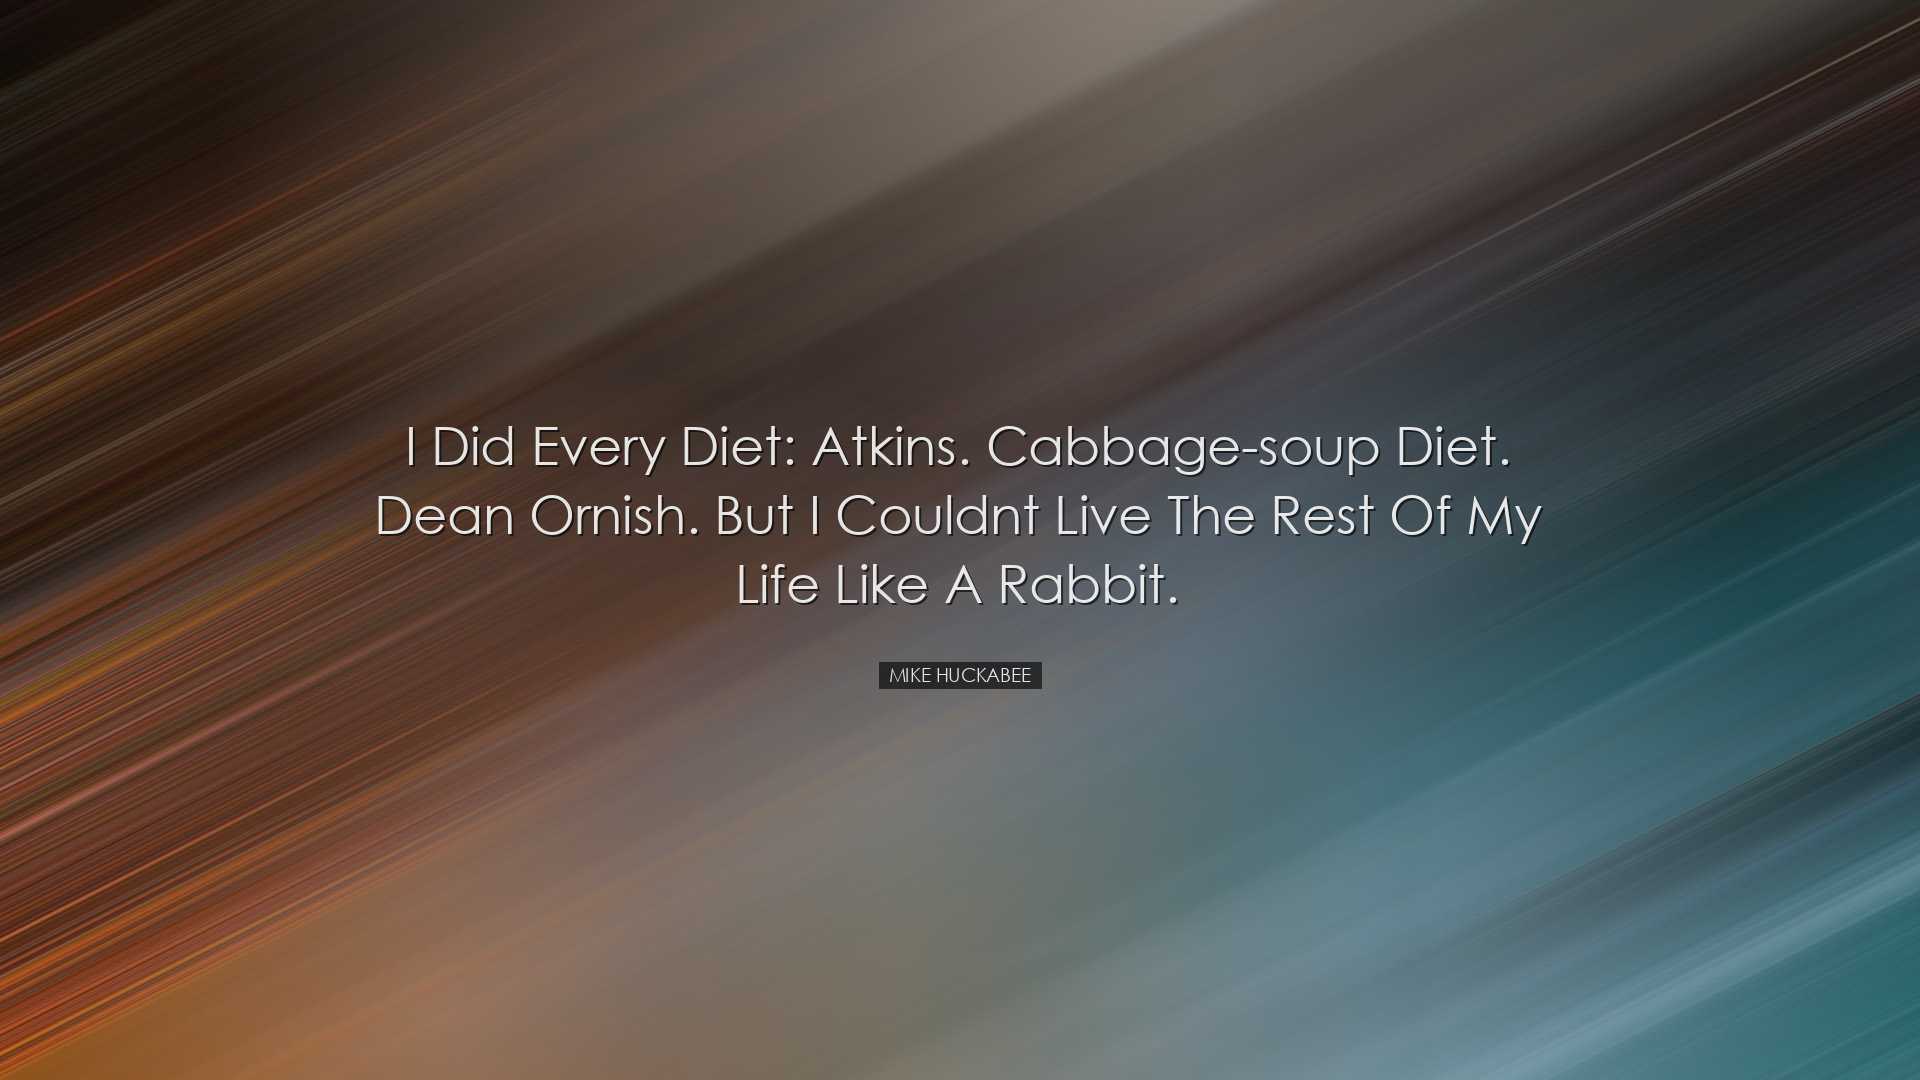 I did every diet: Atkins. Cabbage-soup diet. Dean Ornish. But I co